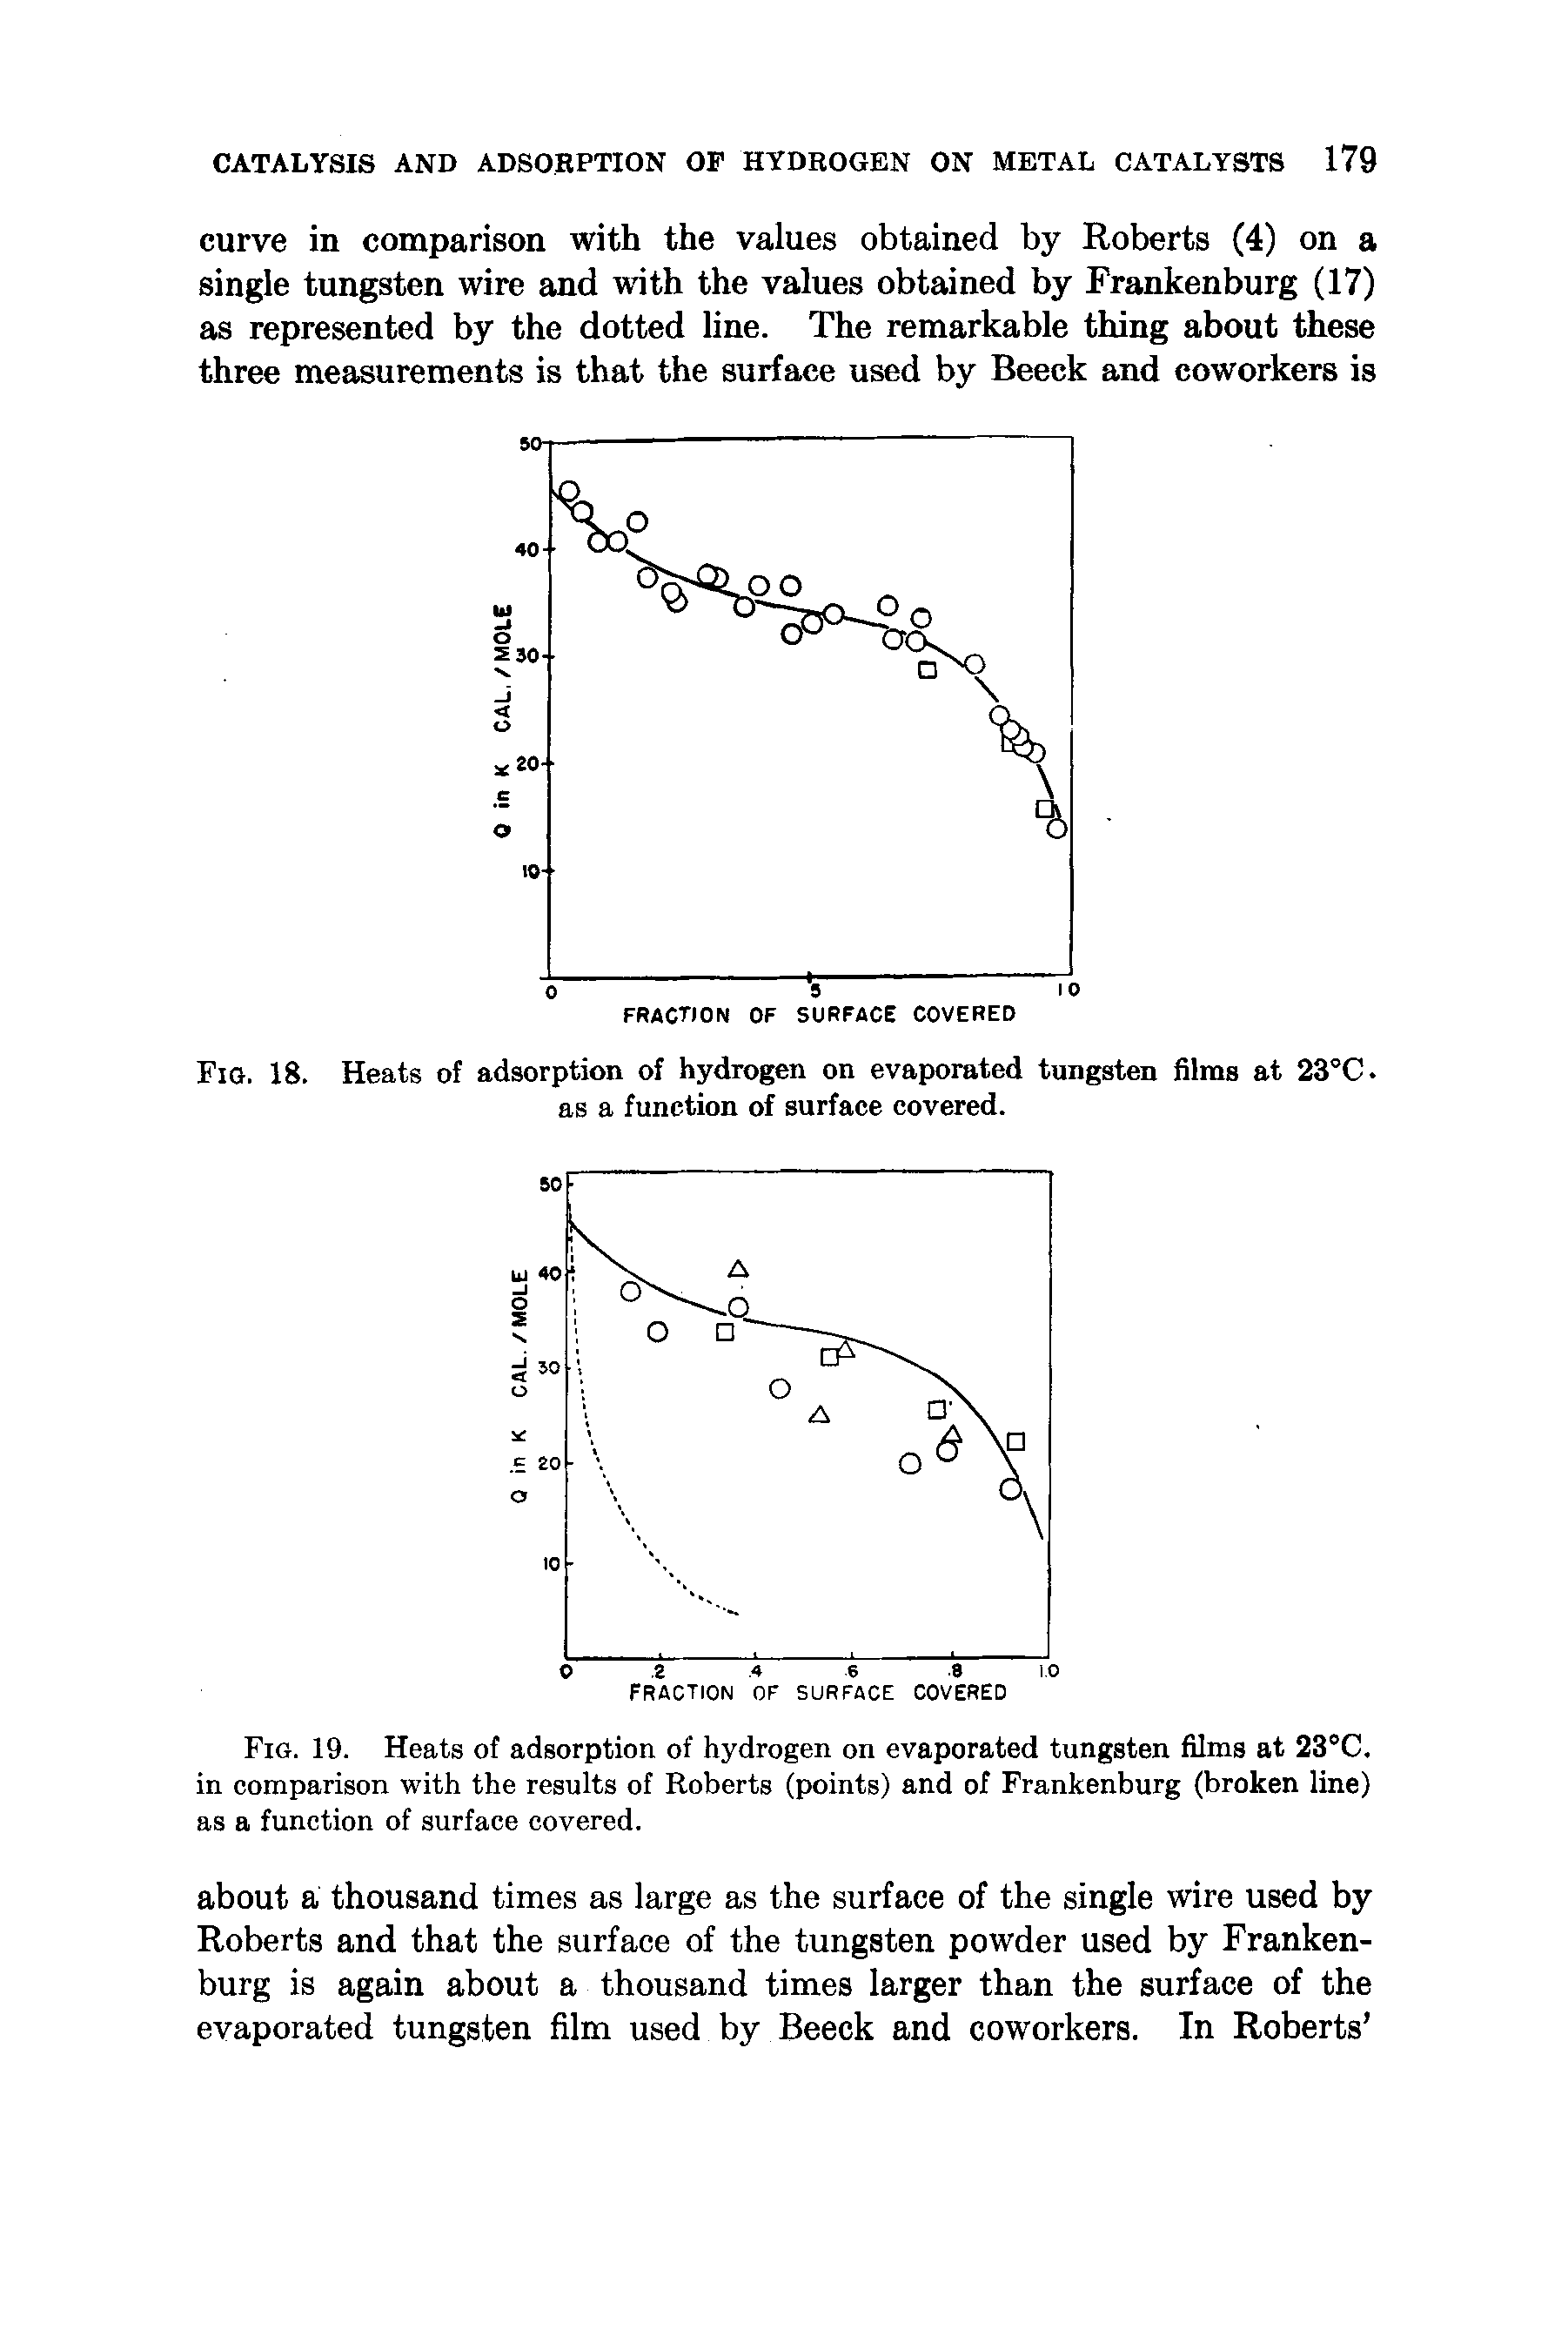 Fig. 19. Heats of adsorption of hydrogen on evaporated tungsten films at 23°C. in comparison with the results of Roberts (points) and of Frankenburg (broken line) as a function of surface covered.